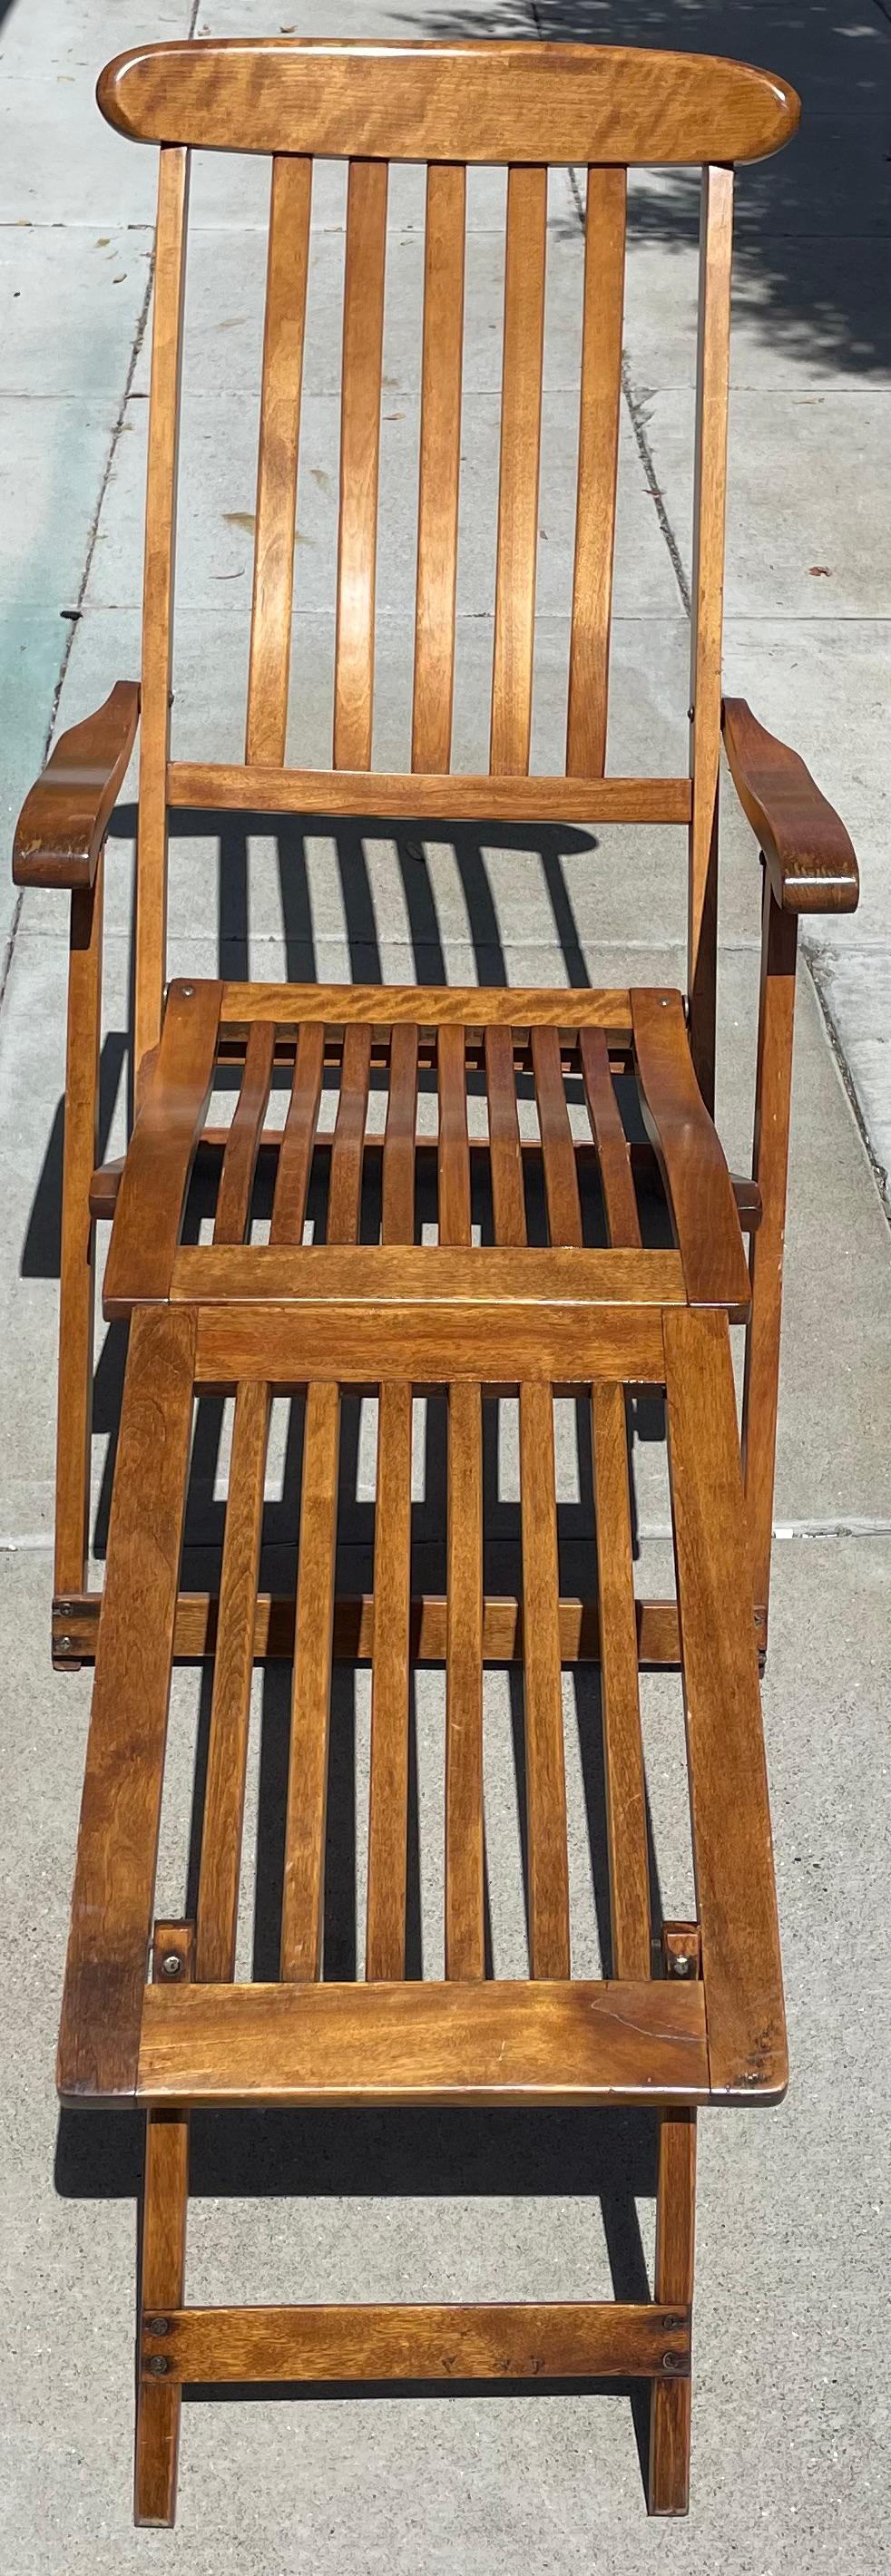 Mid-20th Century Steamer Lounge Chair For Sale